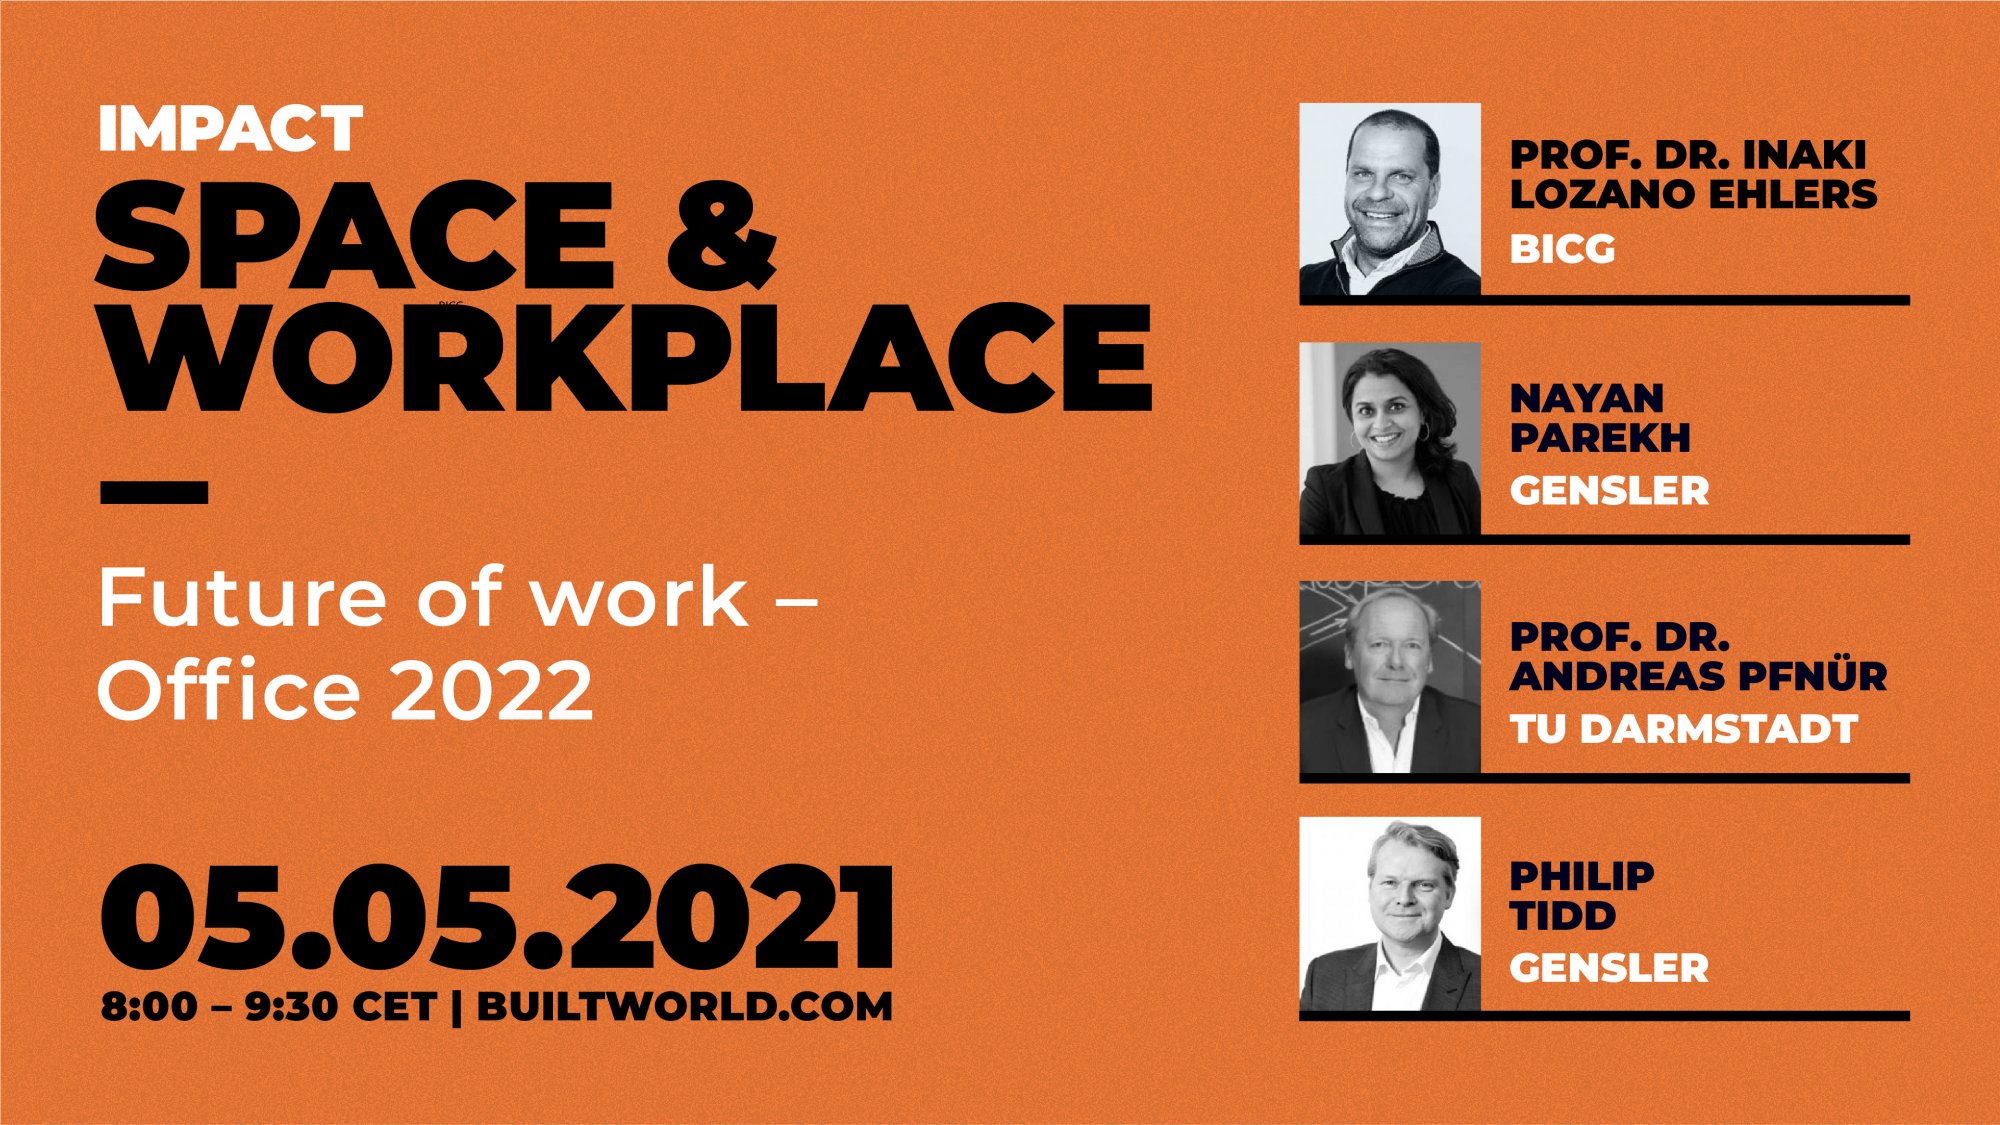 space-workplace-future-of-work-office-2022